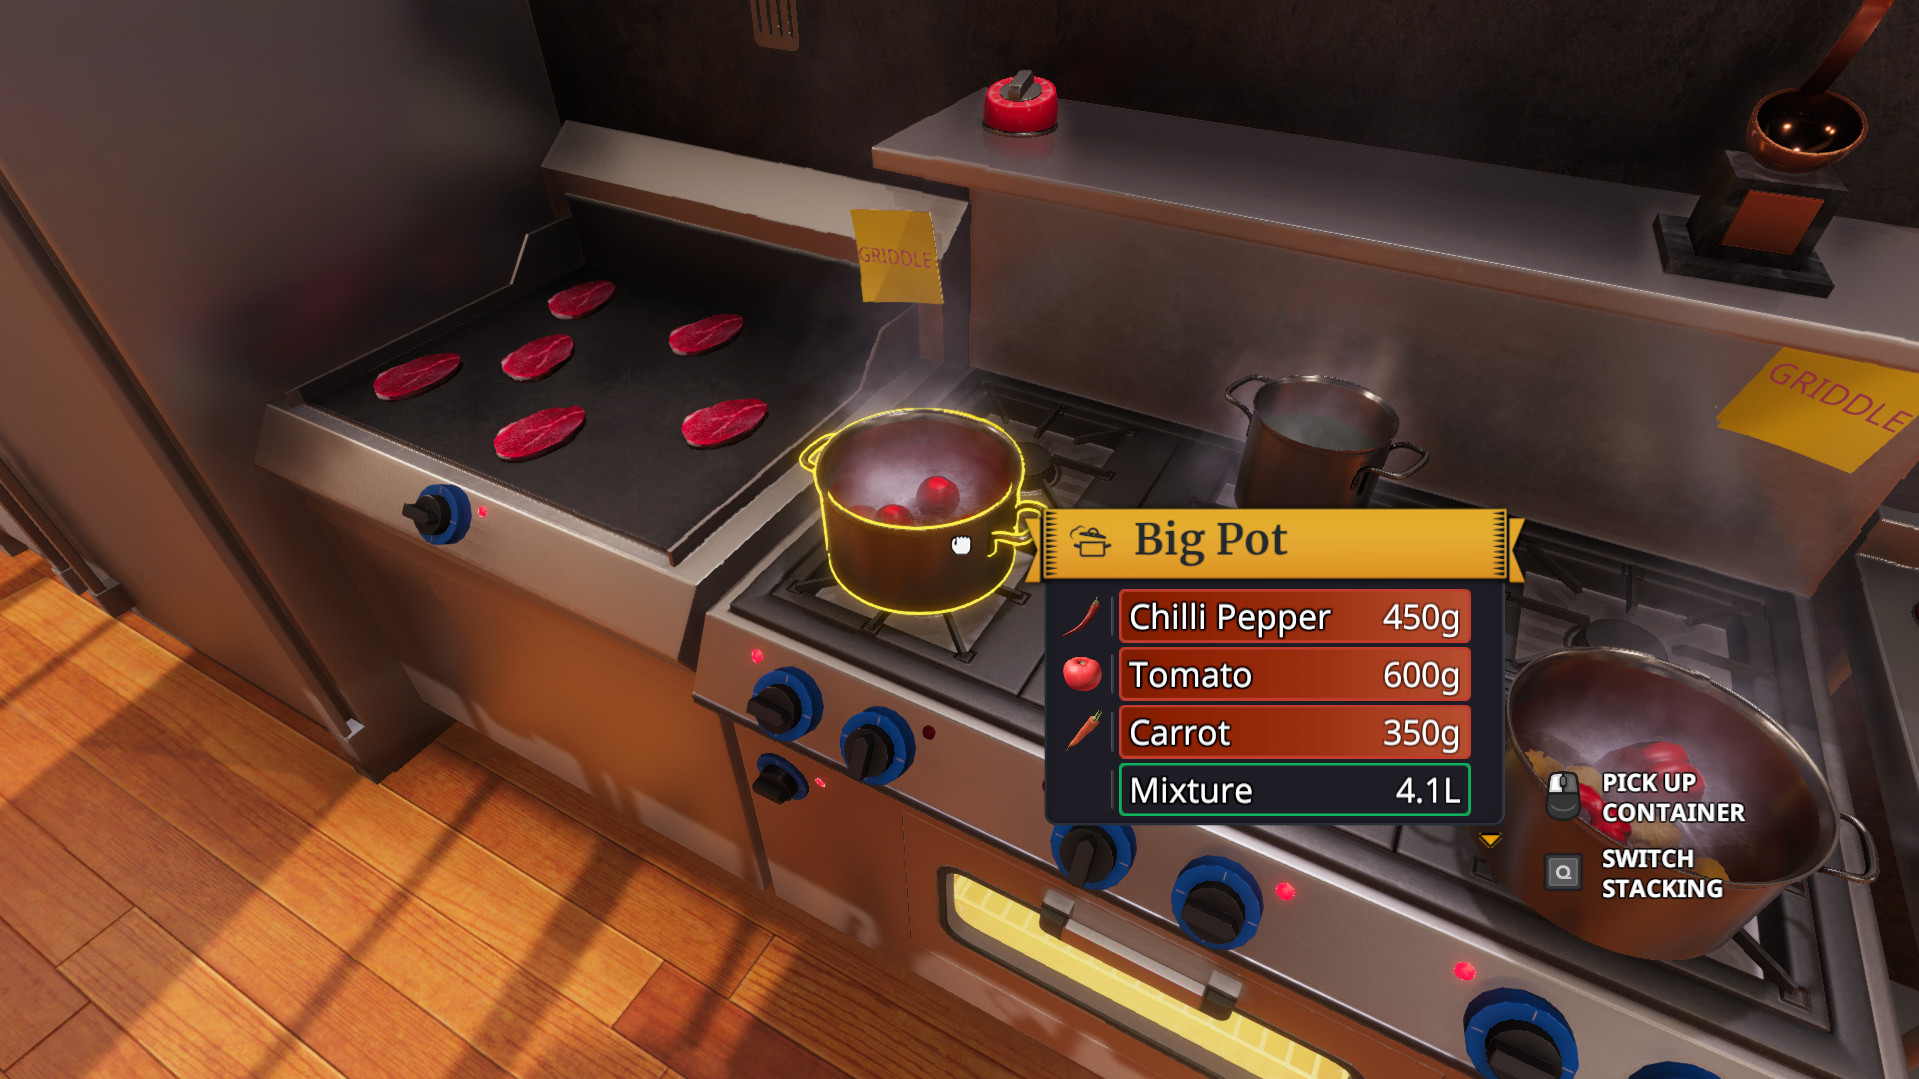 Cooking Simulator System Requirements Can I Run It